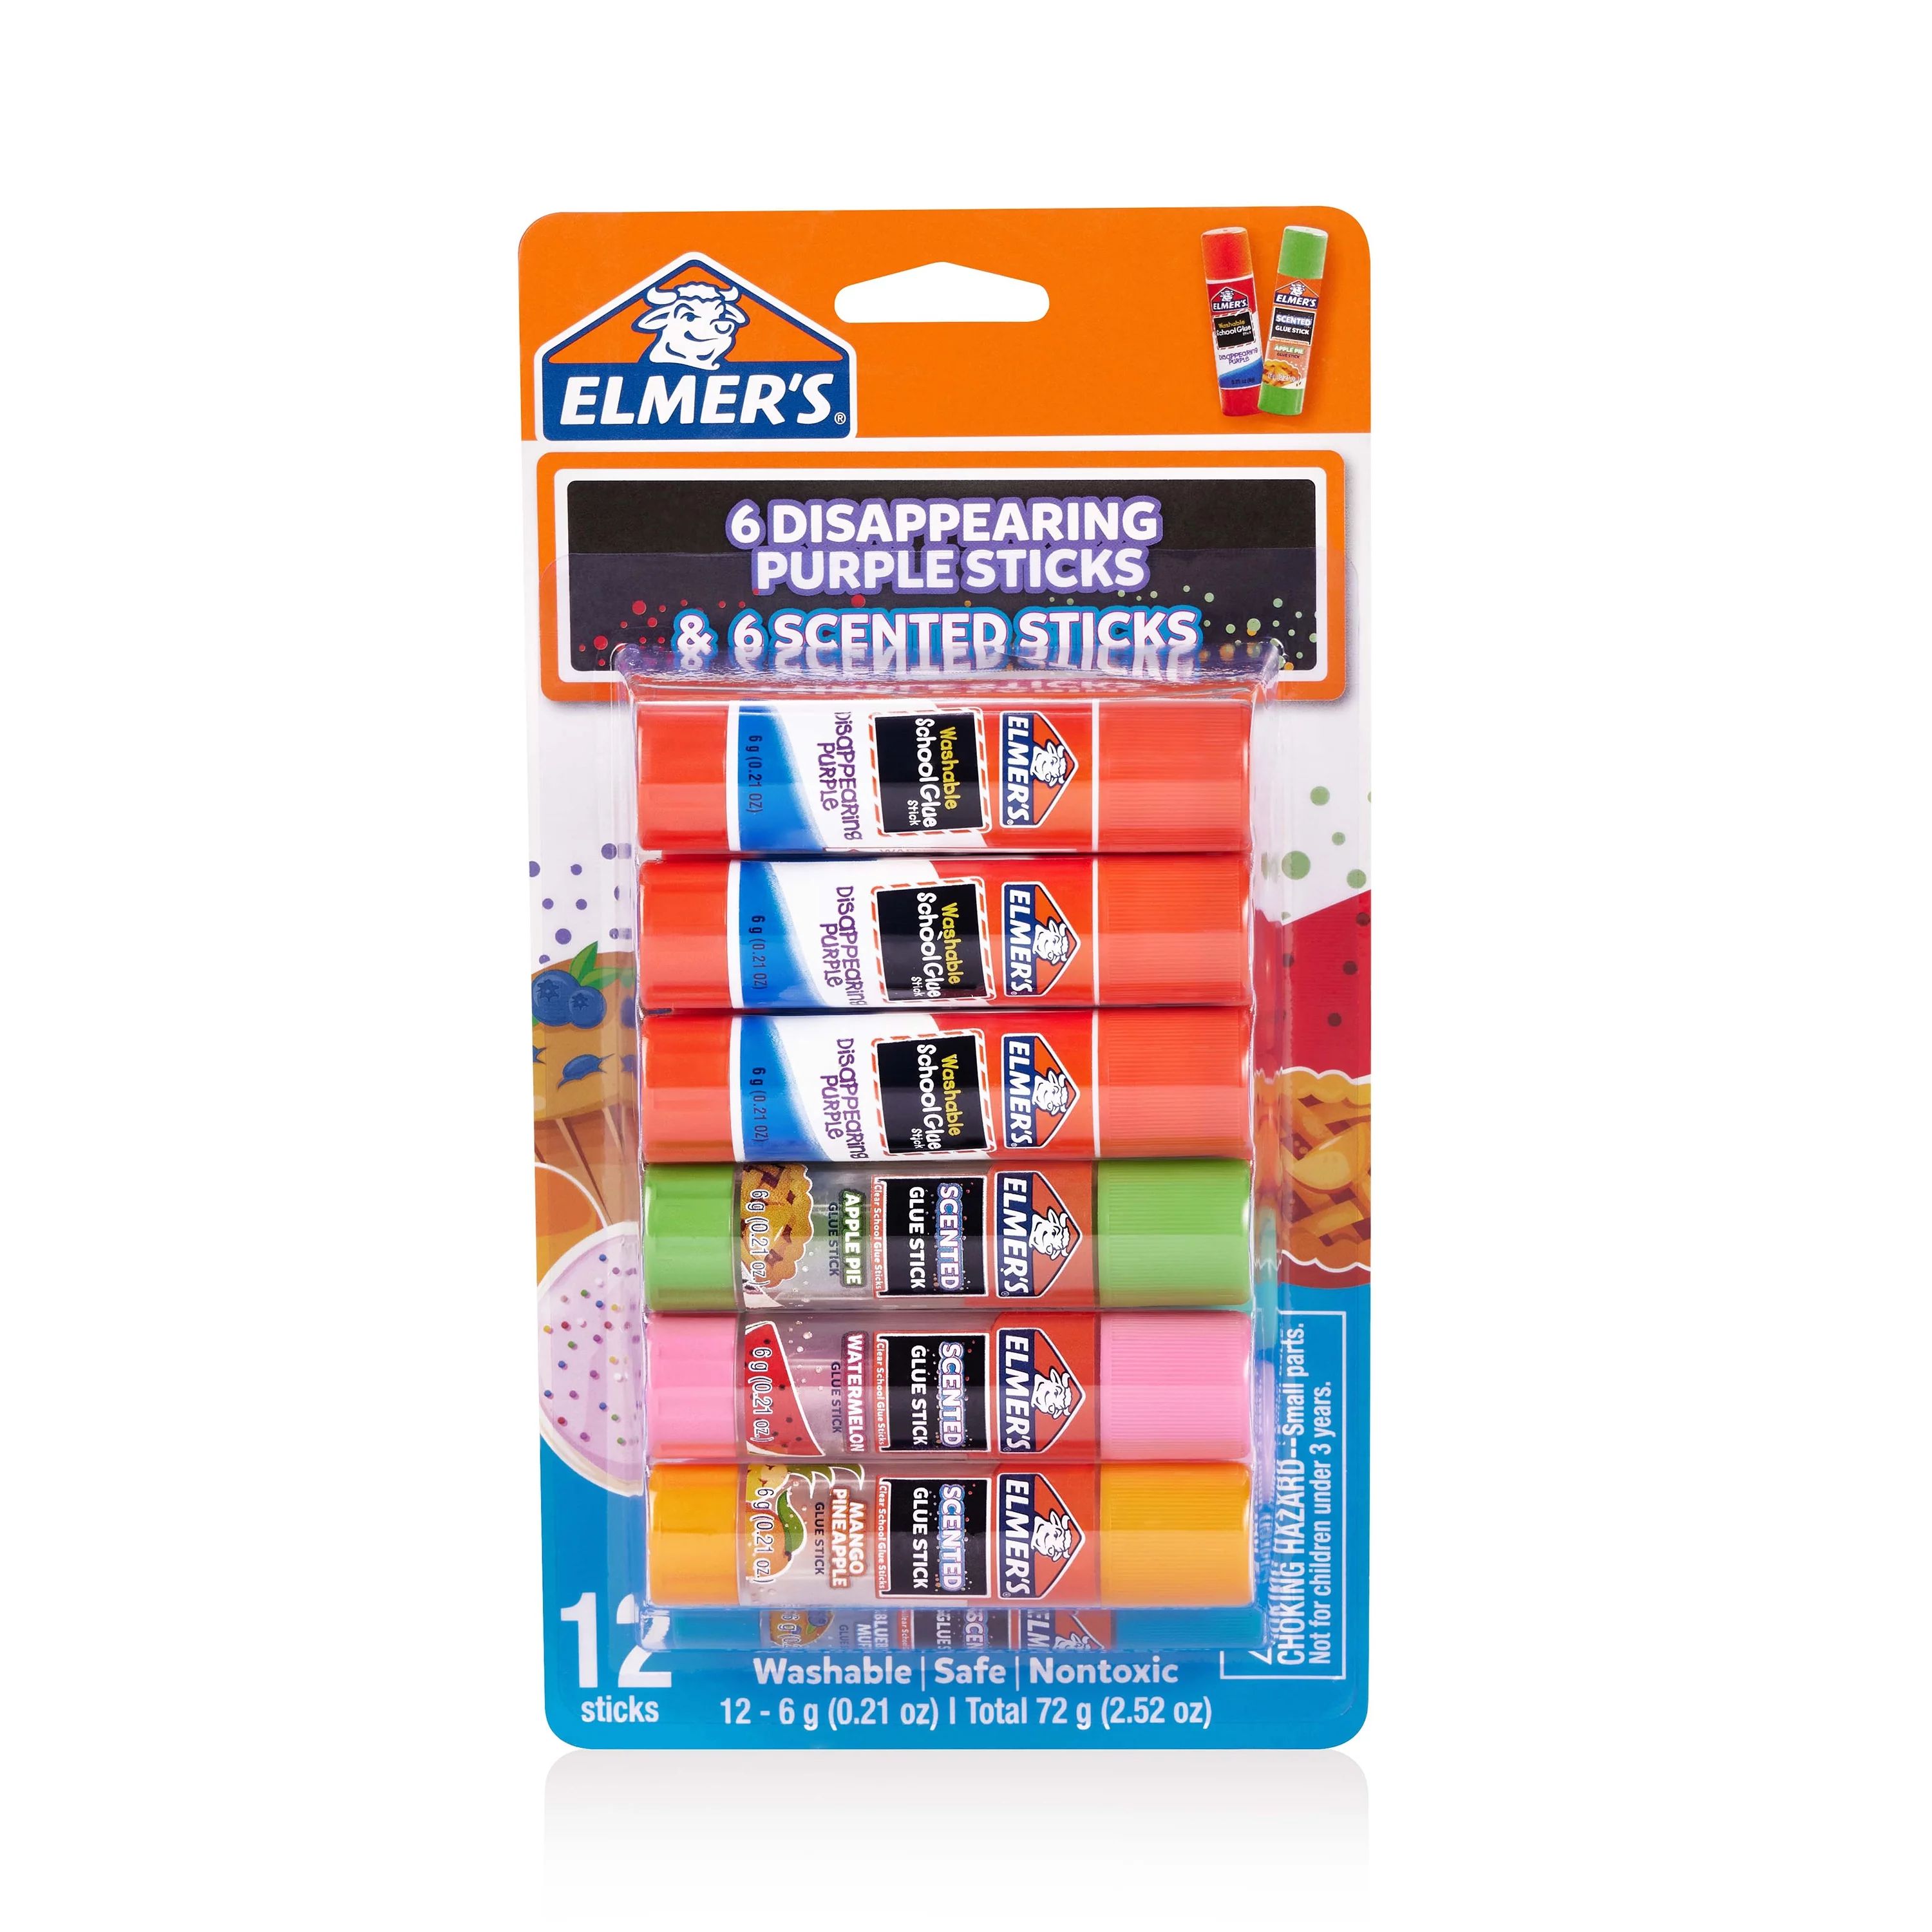 Elmer’s Scented Glue Sticks Variety Pack, Includes Disappearing Purple Glue Sticks, Safe, Nonto... | Walmart (US)